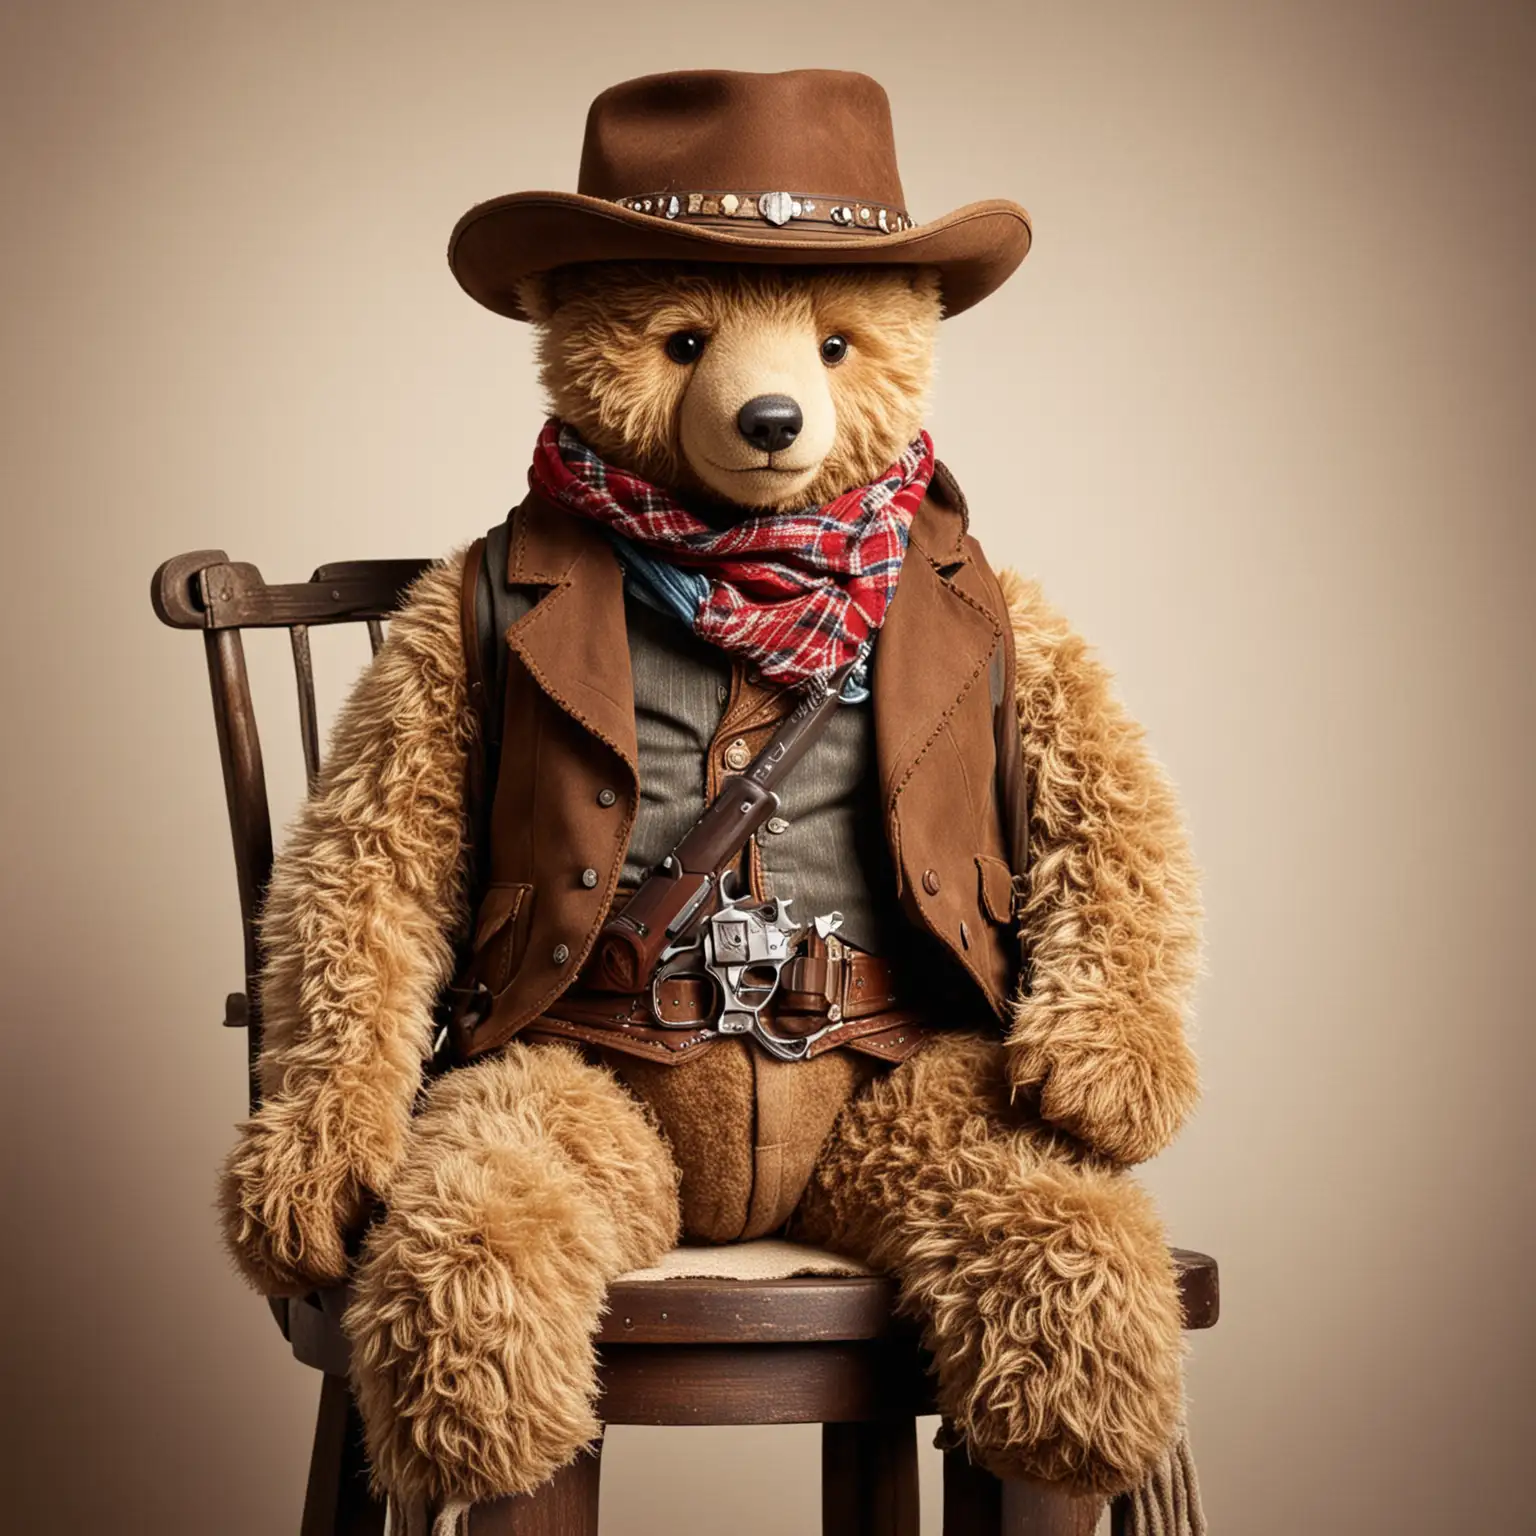 Battered old vintage Teddy Bear Gunslingers, sitting on a barstool, dressed as a cowboy with hat, scarf, waistcoat, gun belt with gun, blank background